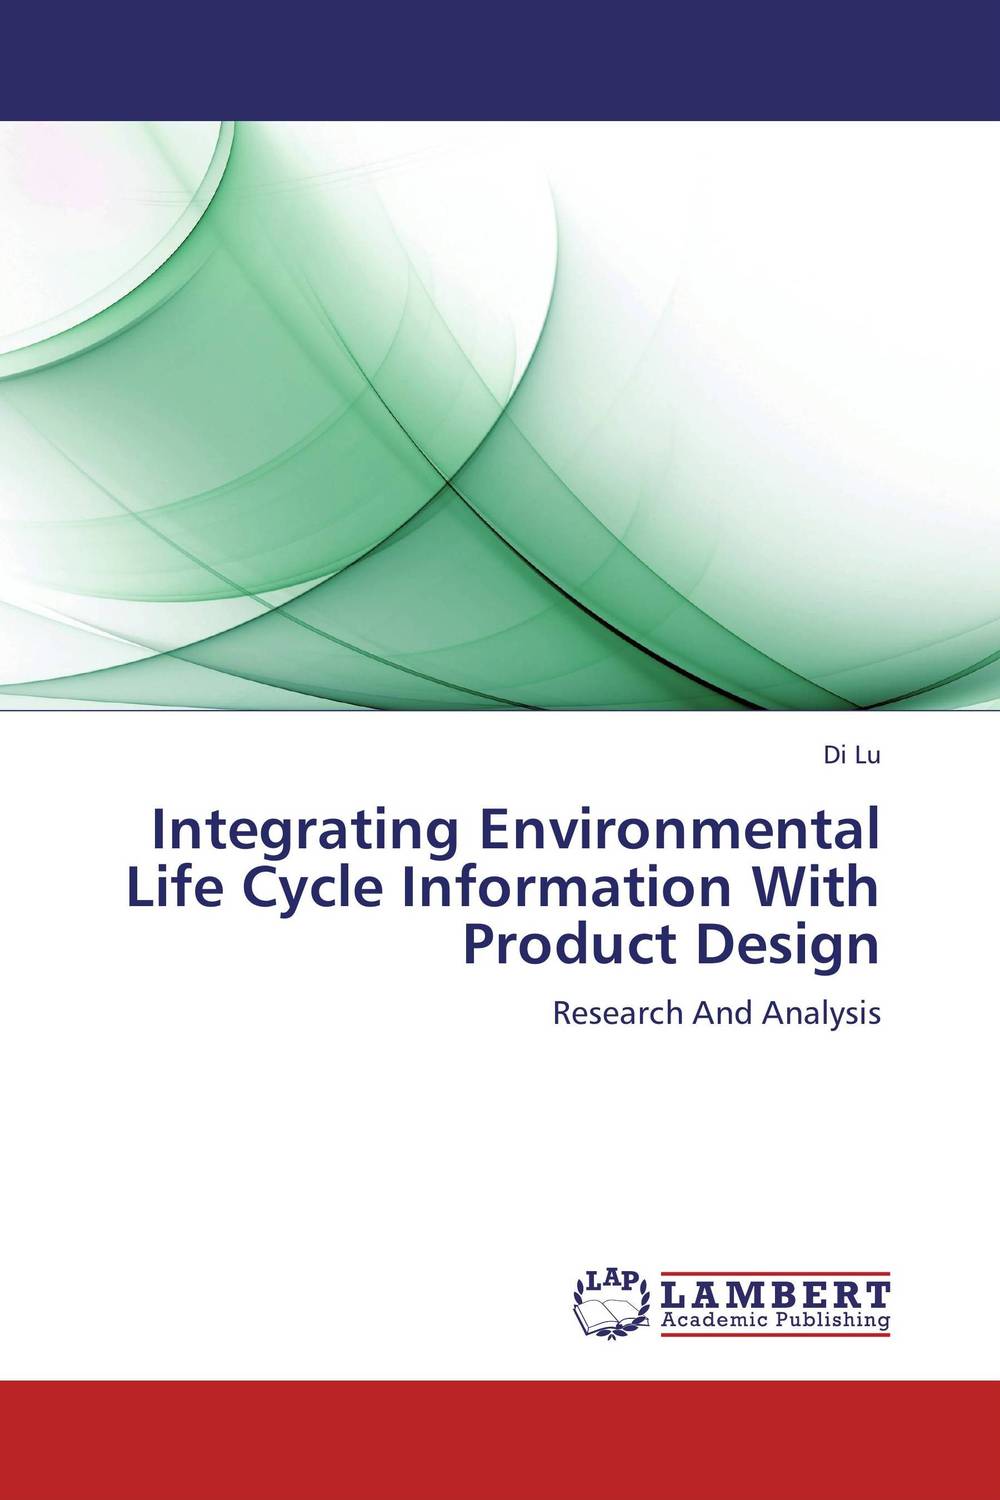 Integrating Environmental Life Cycle Information With Product Design